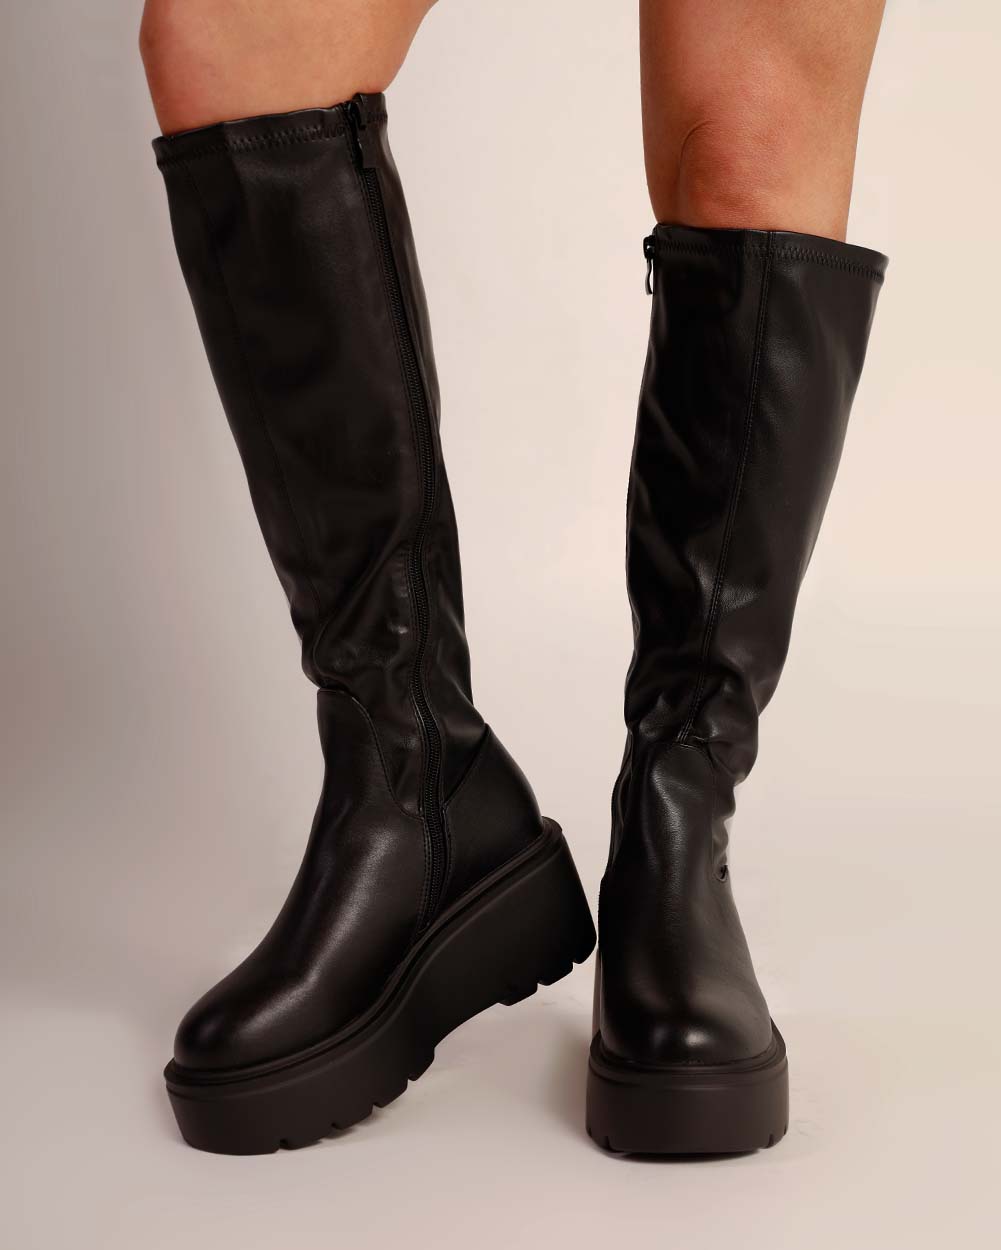 Bad Decisions Knee-High Zip Up Boots-Black-Front